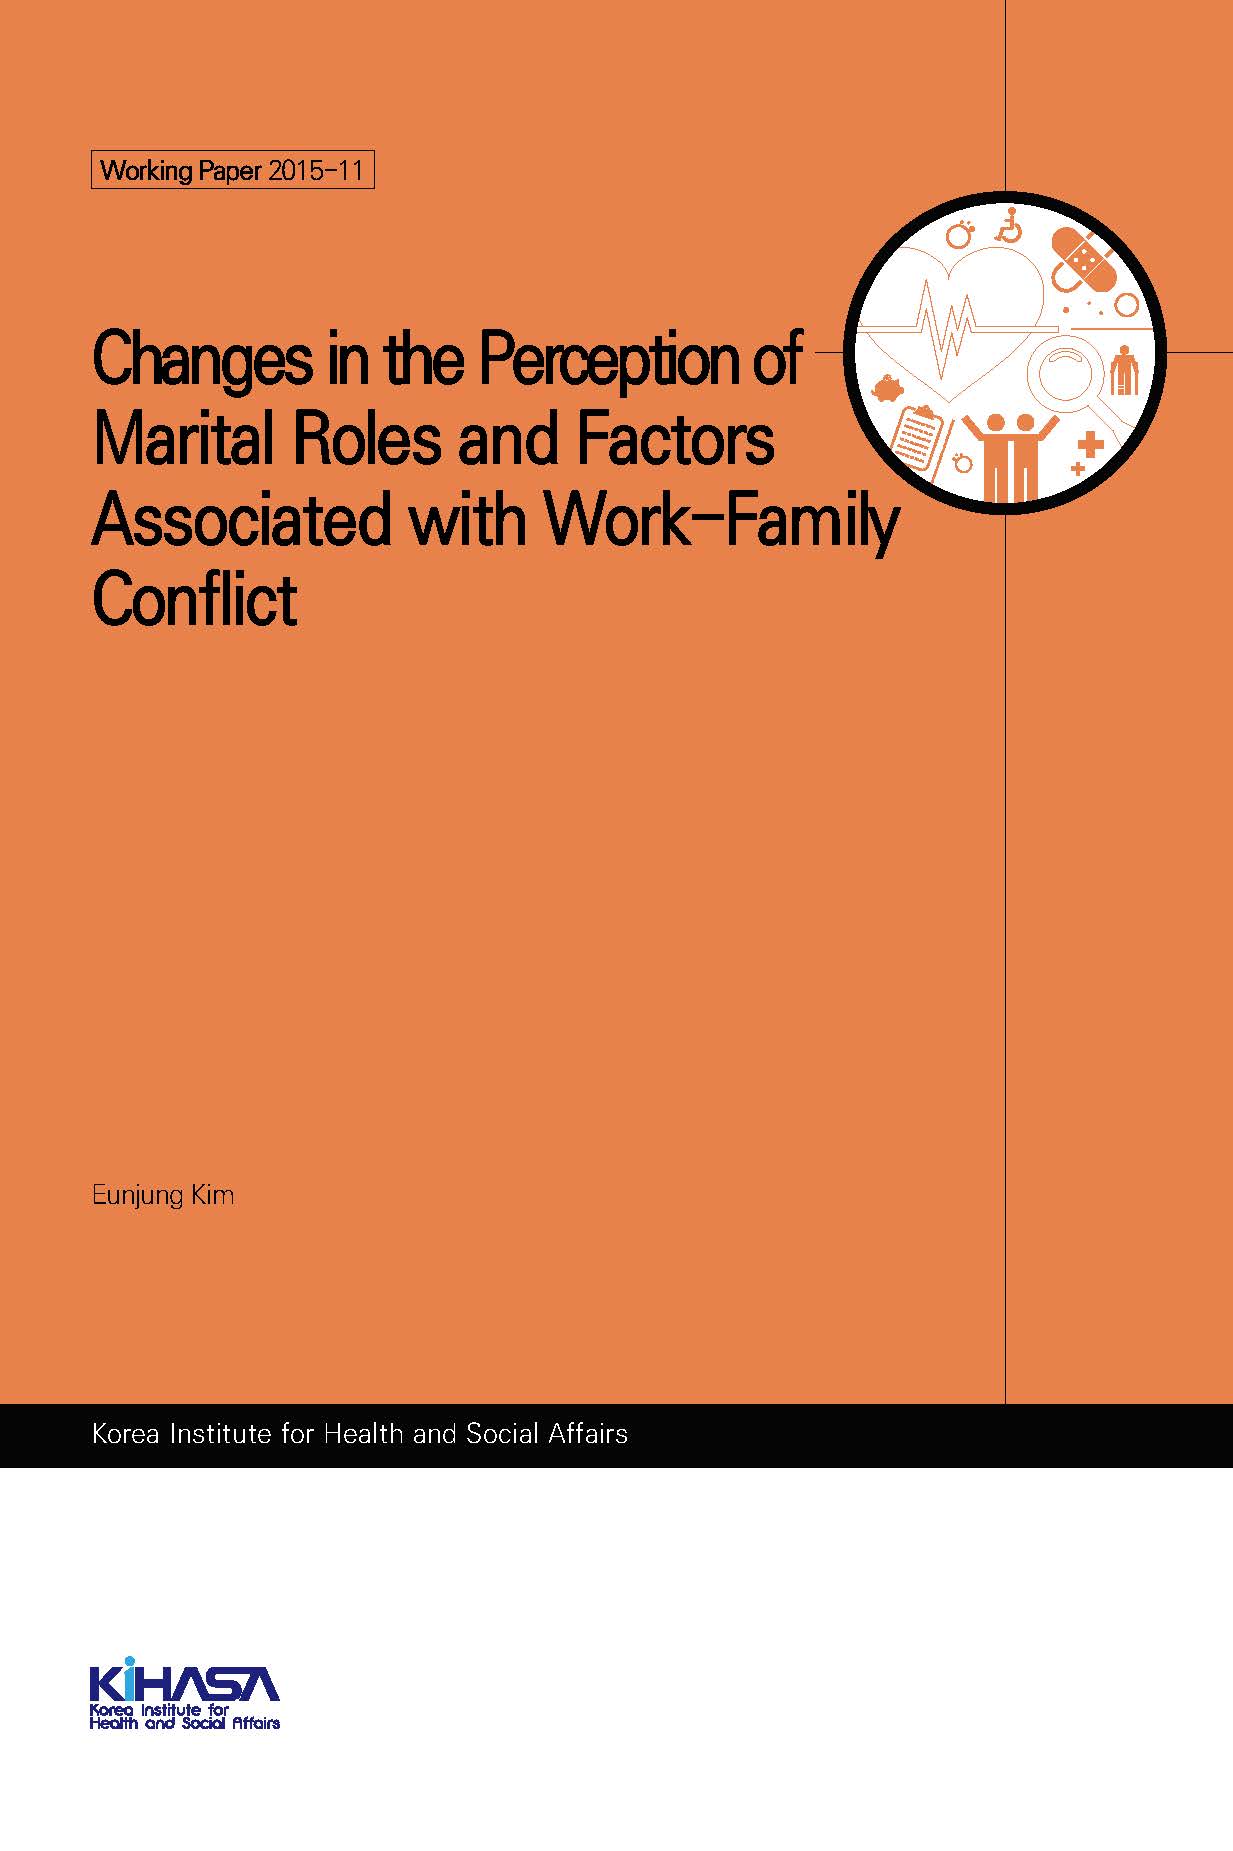 Changes in the Perception of Marital Roles and Factors Associated with Work-Family Conflict